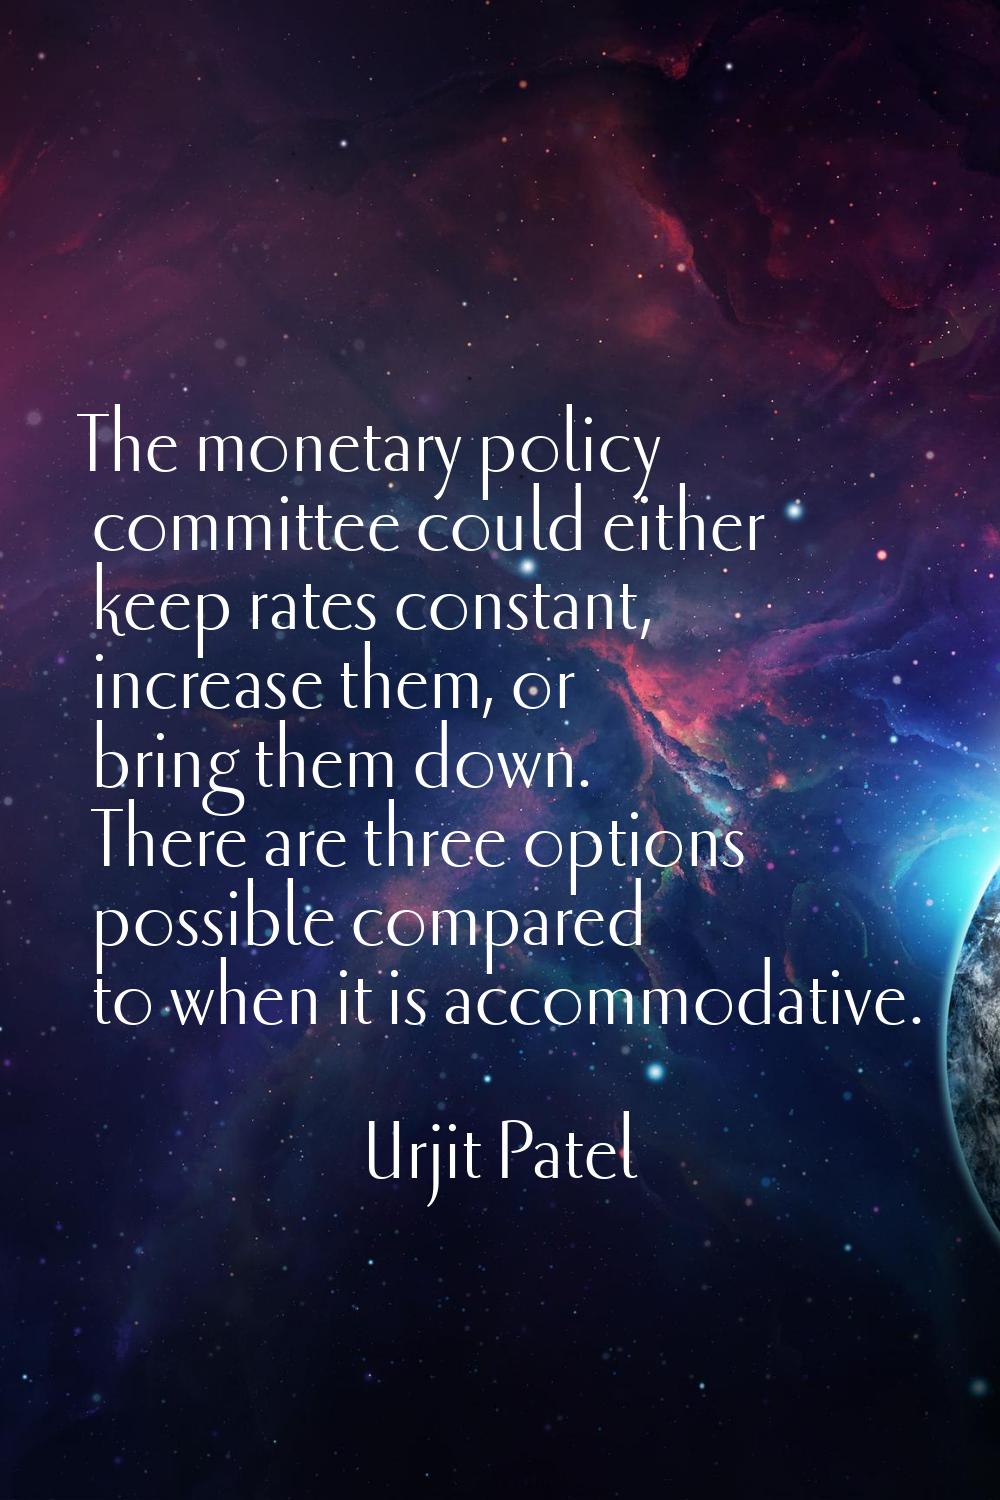 The monetary policy committee could either keep rates constant, increase them, or bring them down. 